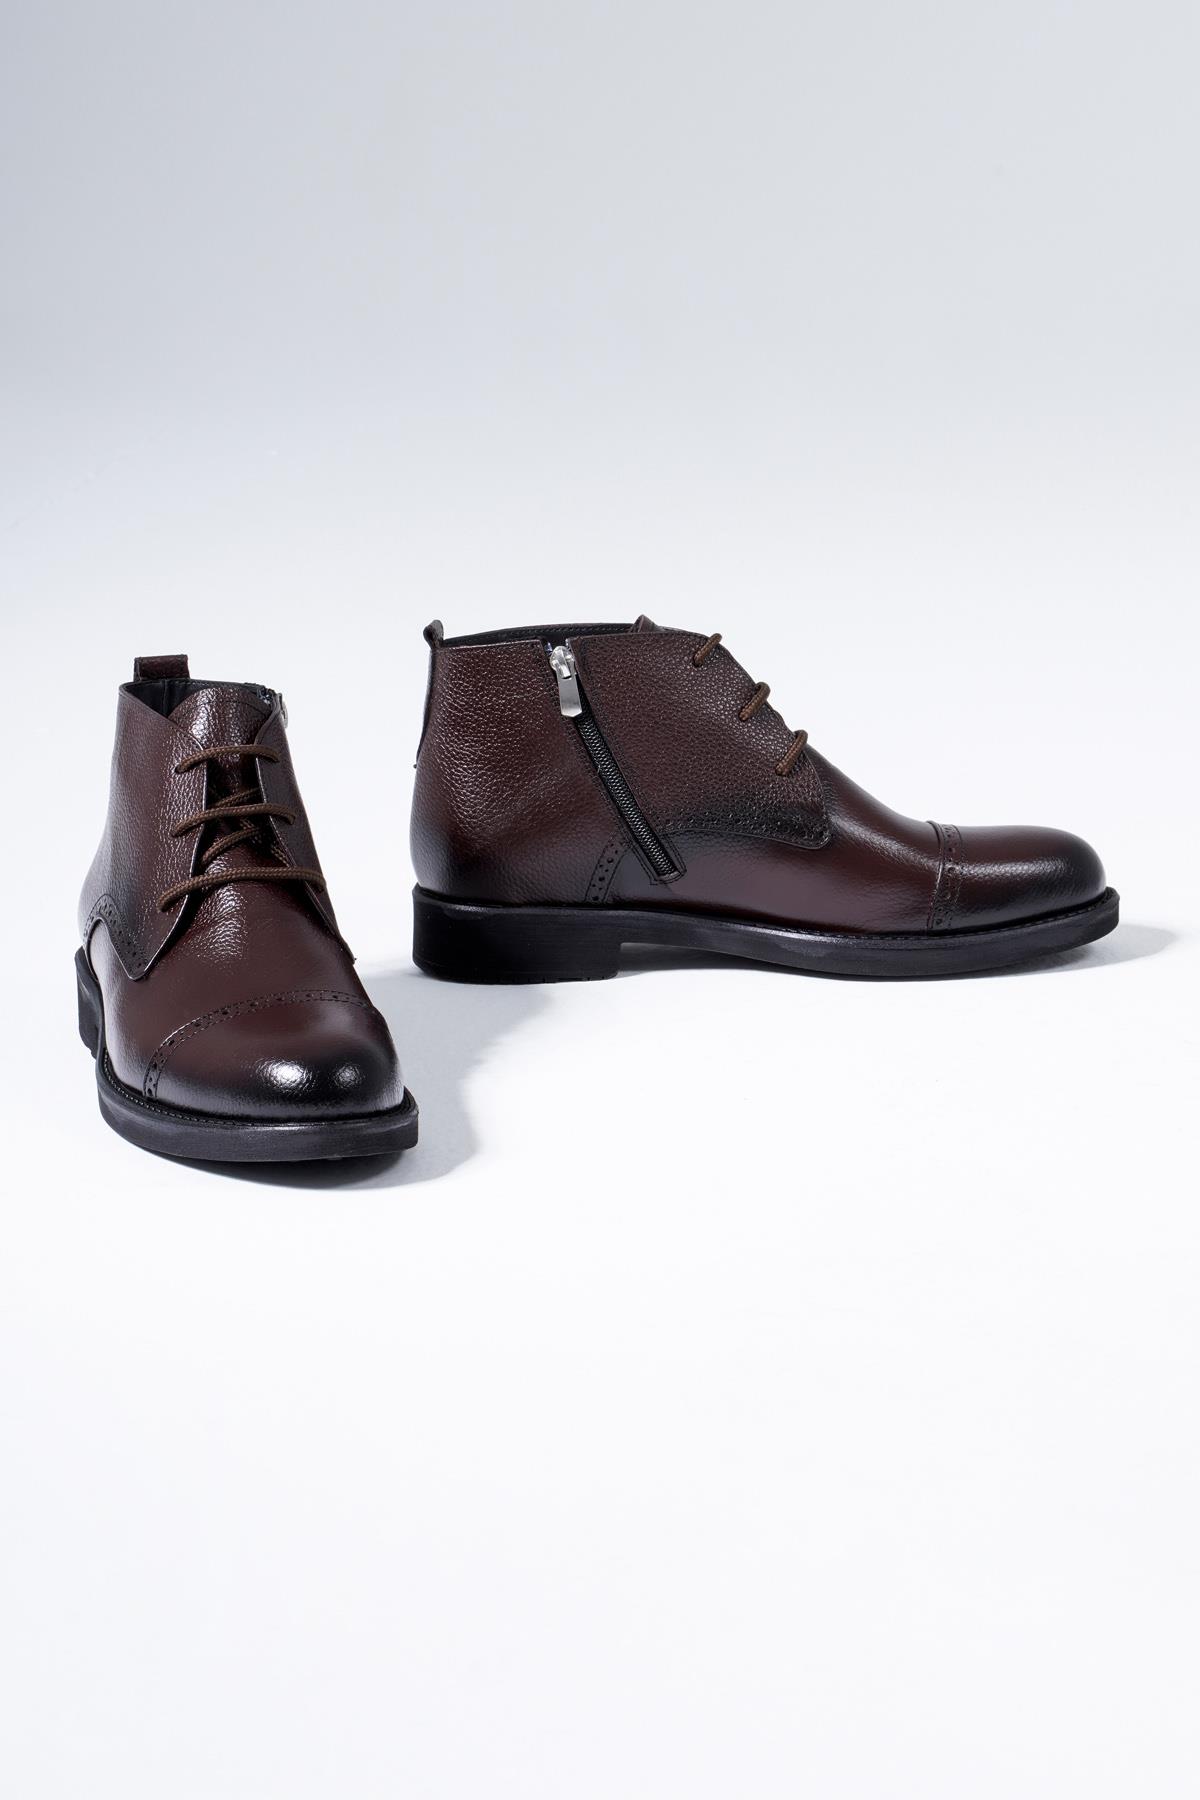 Men's Genuine Leather Boots